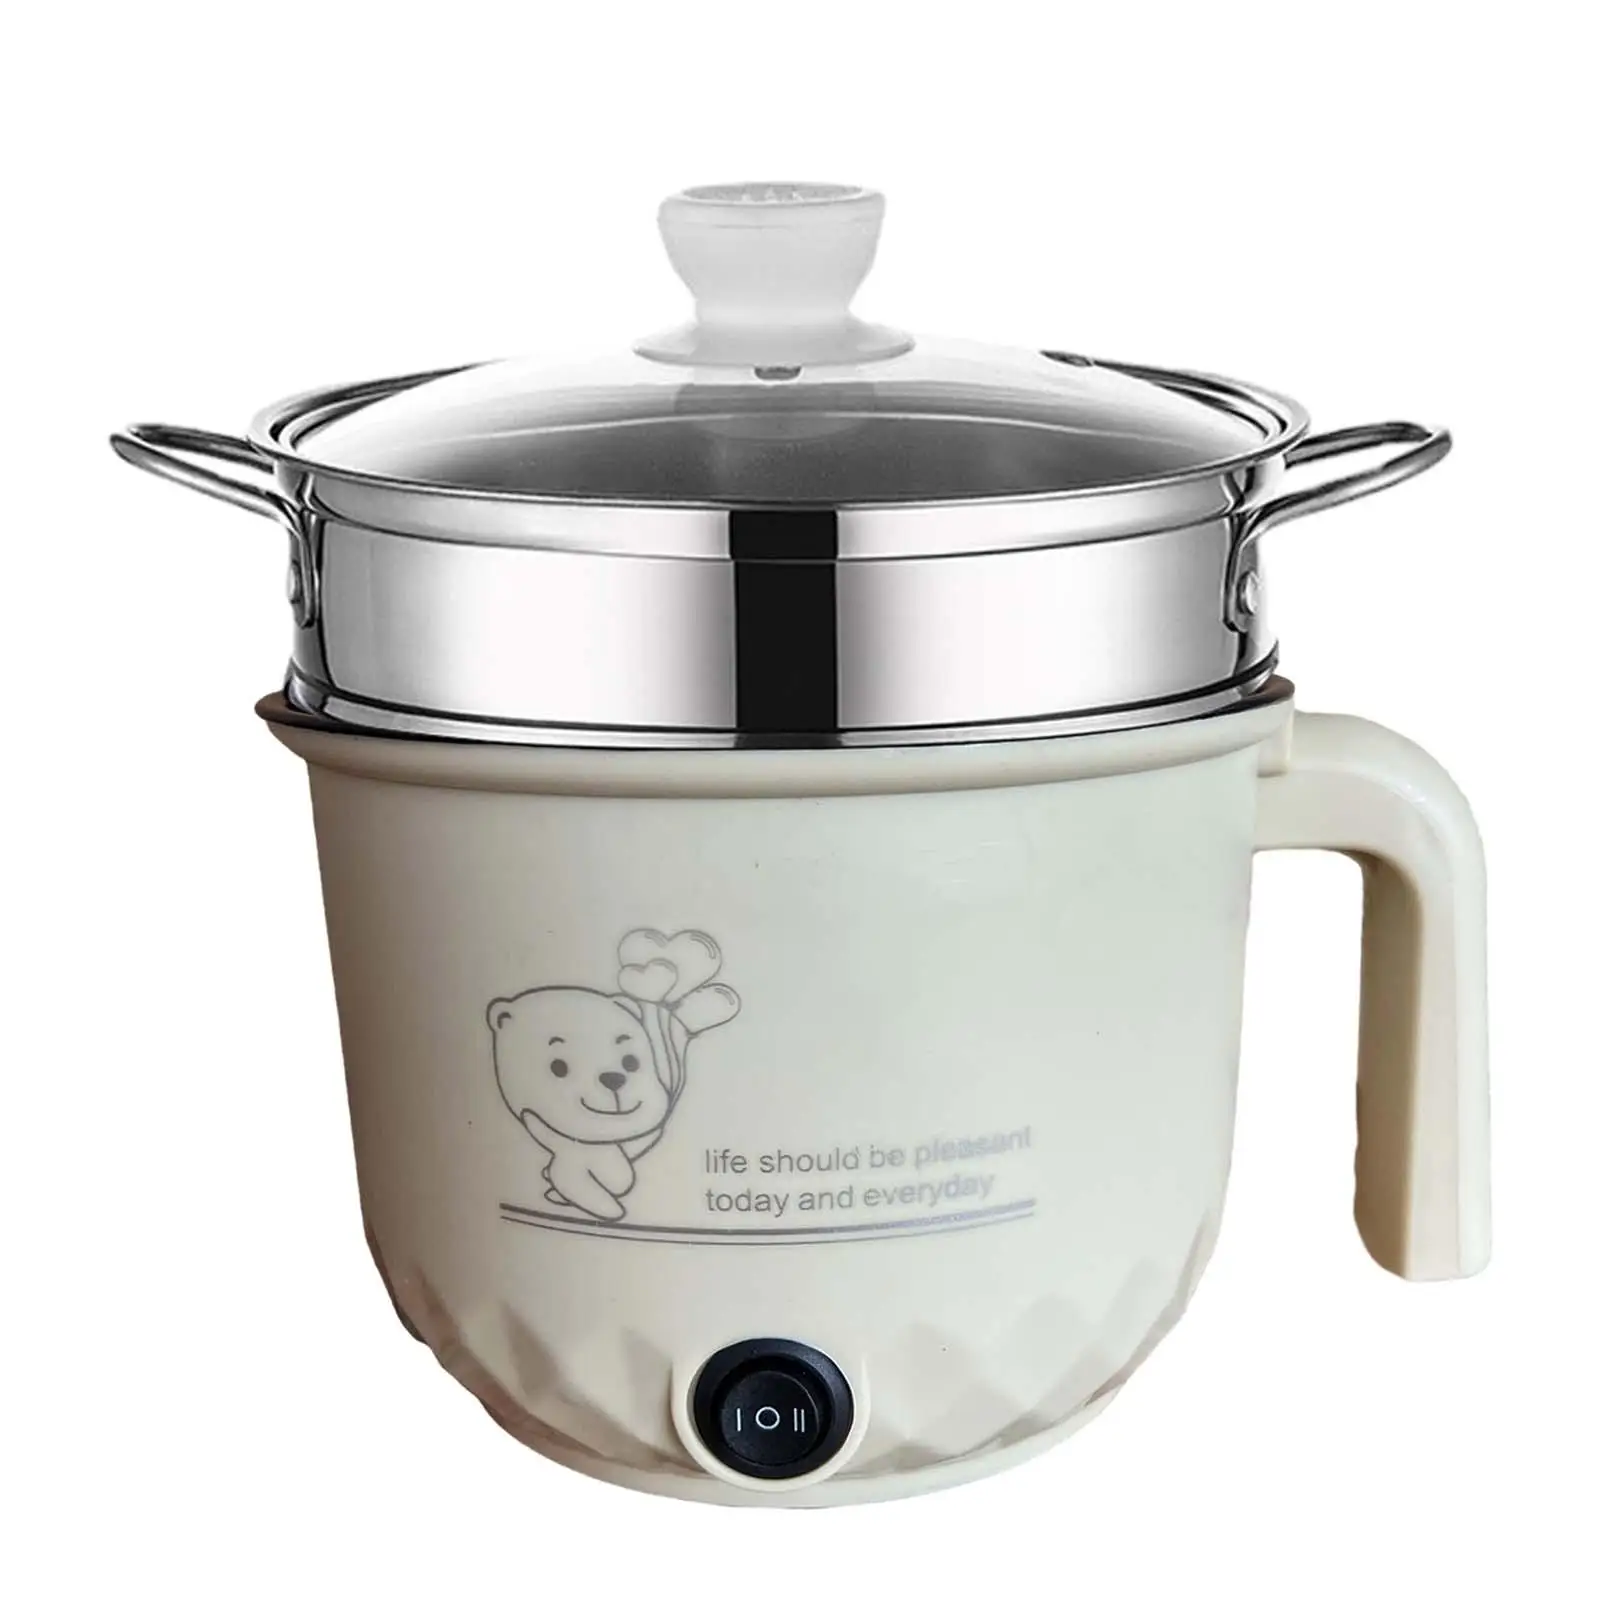 Electric Cooking Pot Stainless Steel Electric Skillet Small Rice Cooker Mini Cooker for Noodles Oatmeal Dumpling Fry Pasta